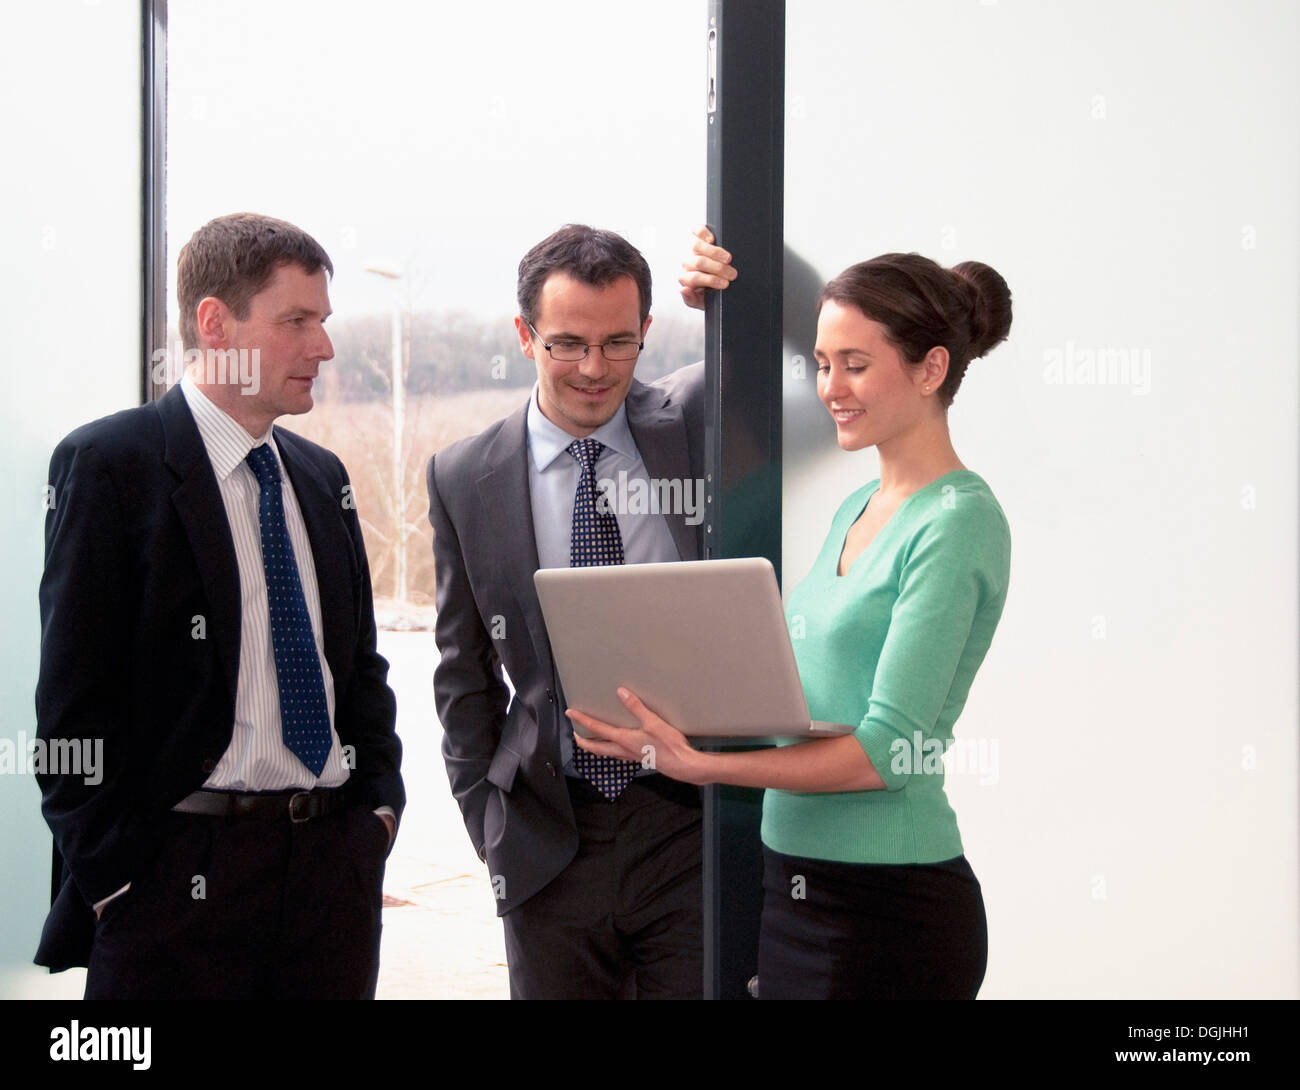 Three colleagues talking, woman holding laptop Stock Photo